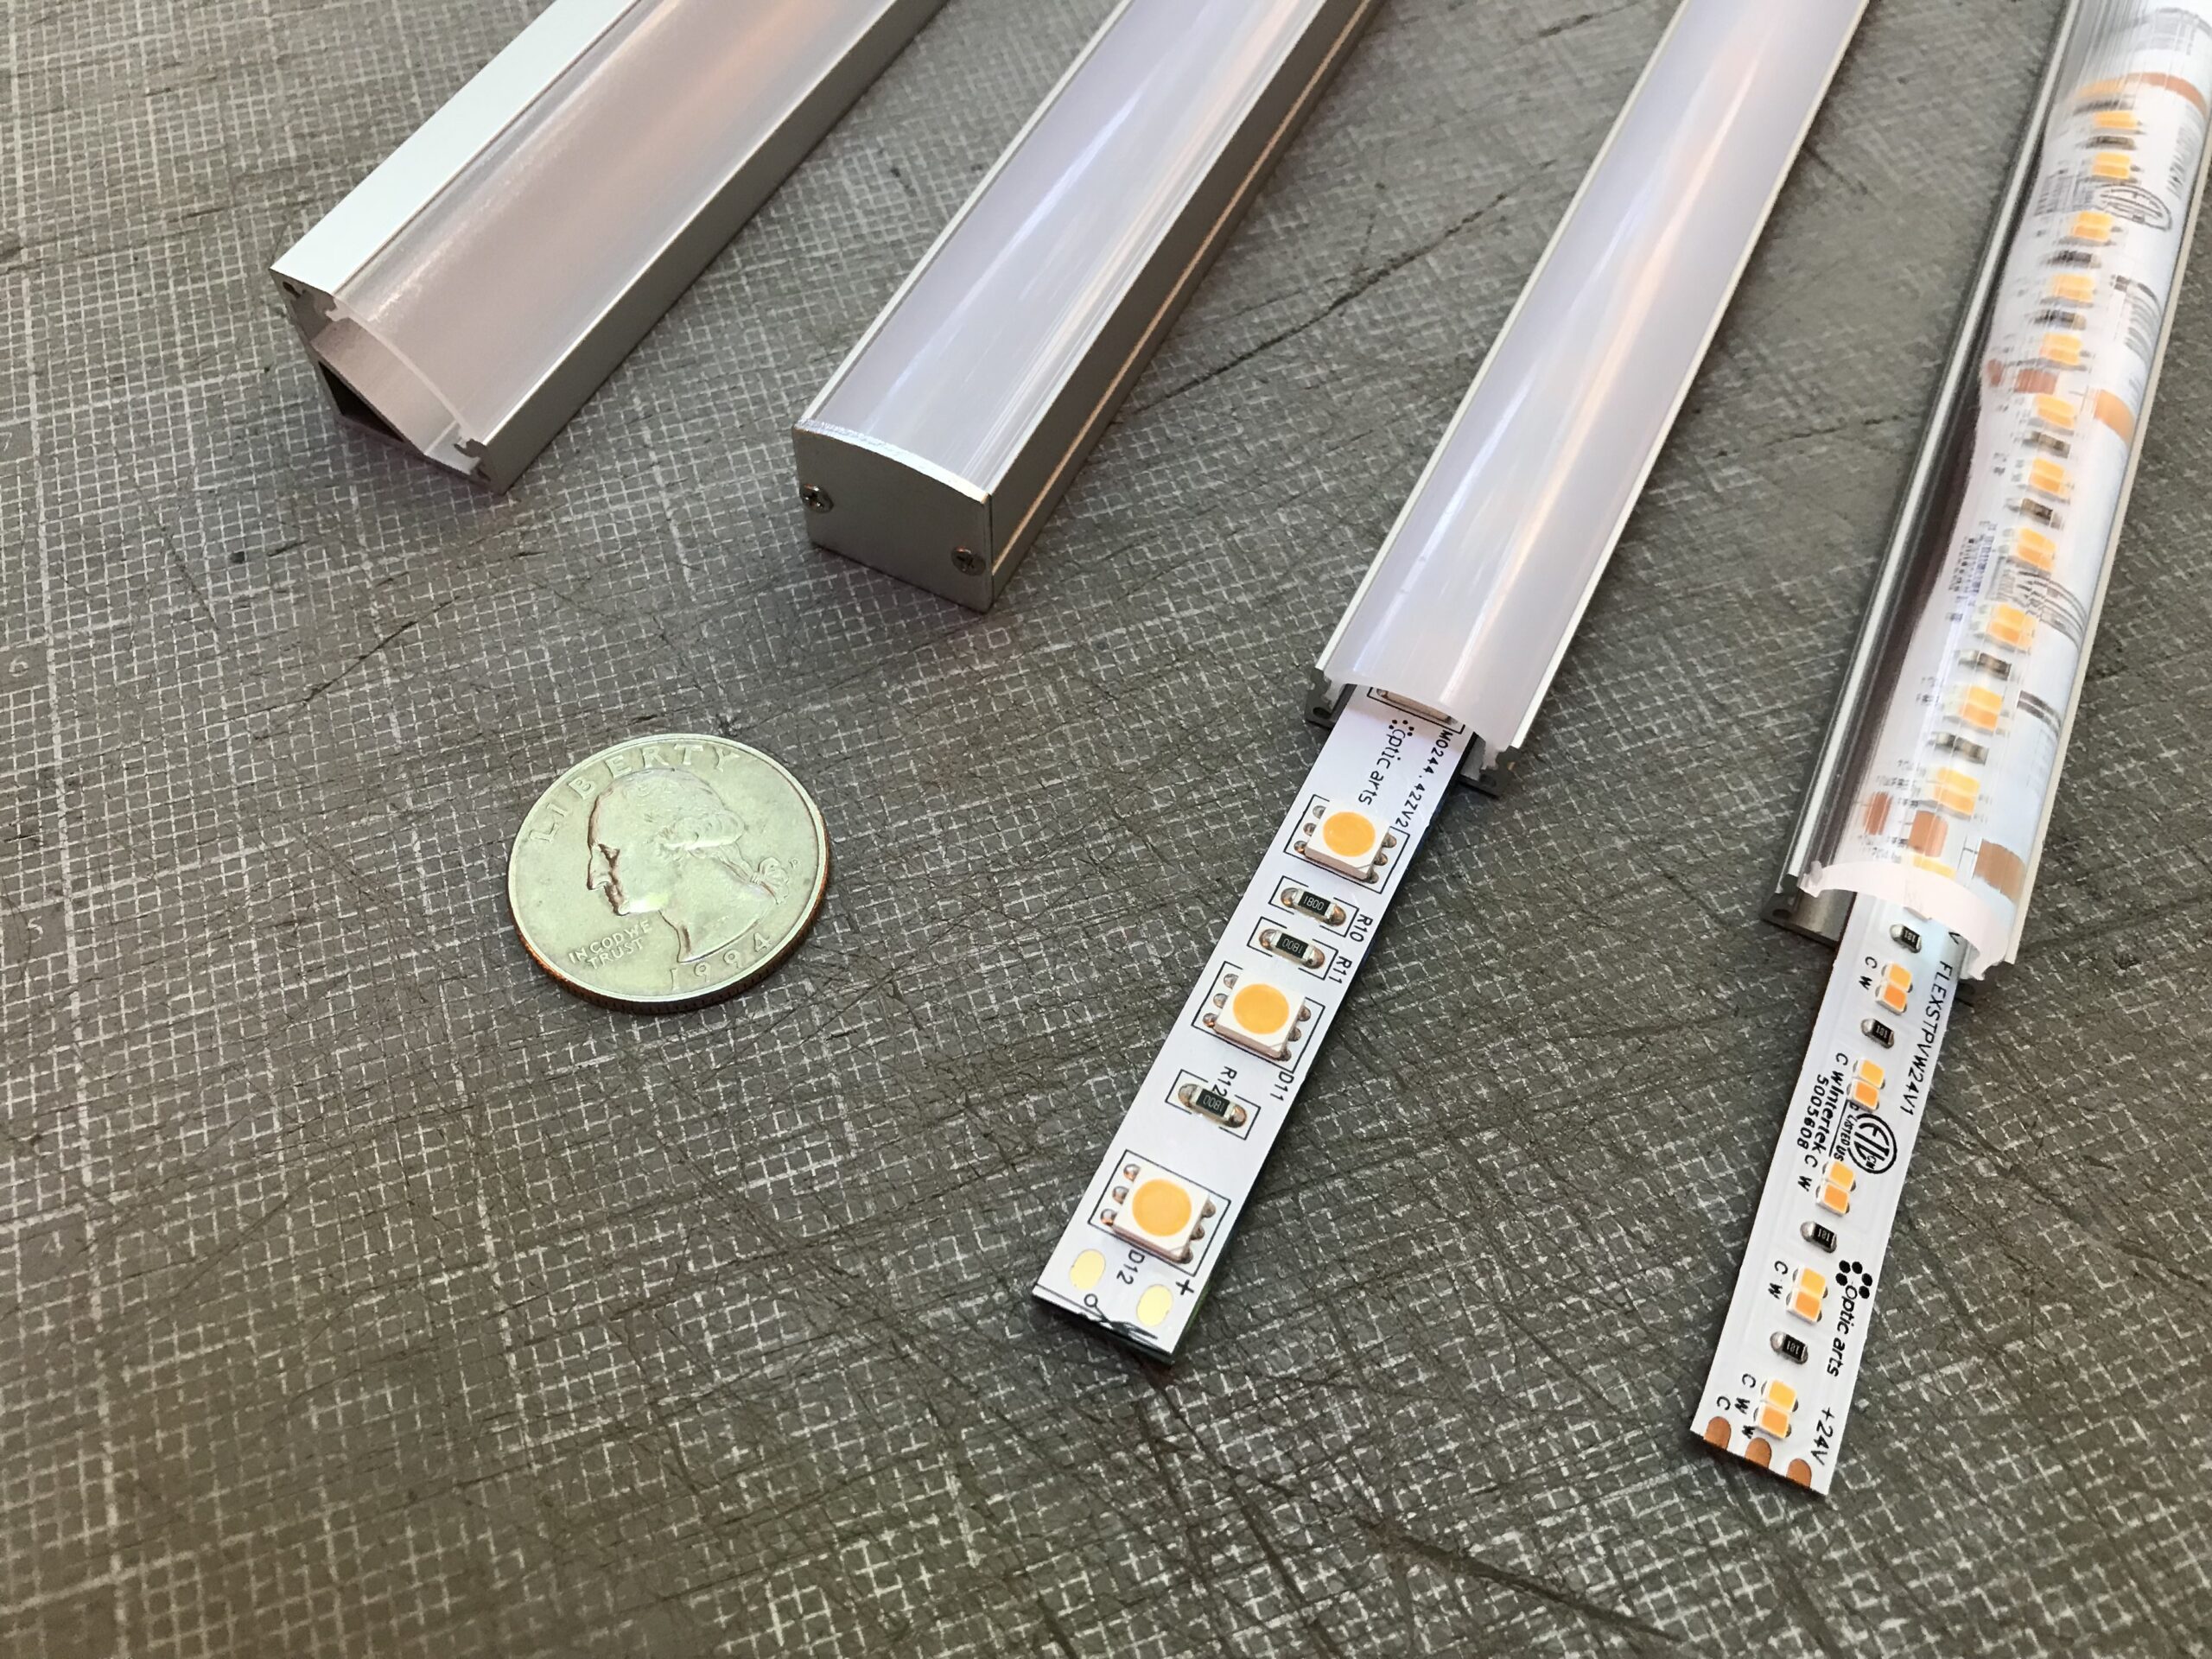 A photograph of LED strip lights being compared to a quarter, which is presented for size and scale.